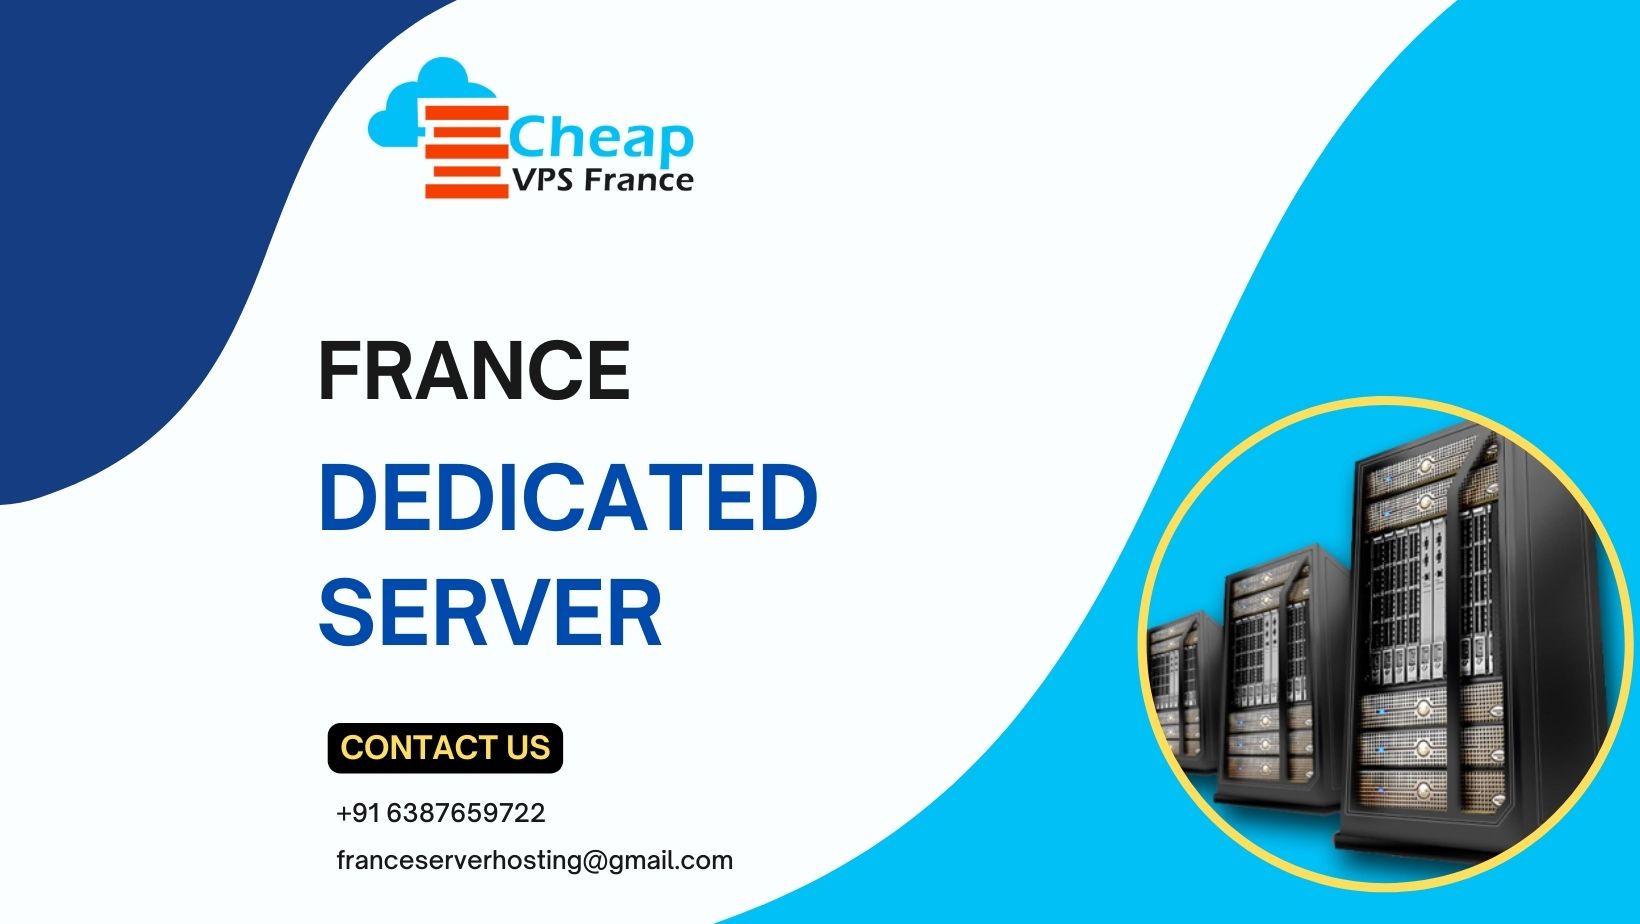 Cheapvpsfrance is the best choice if you have been looking for a France Dedicated Server Hosting.